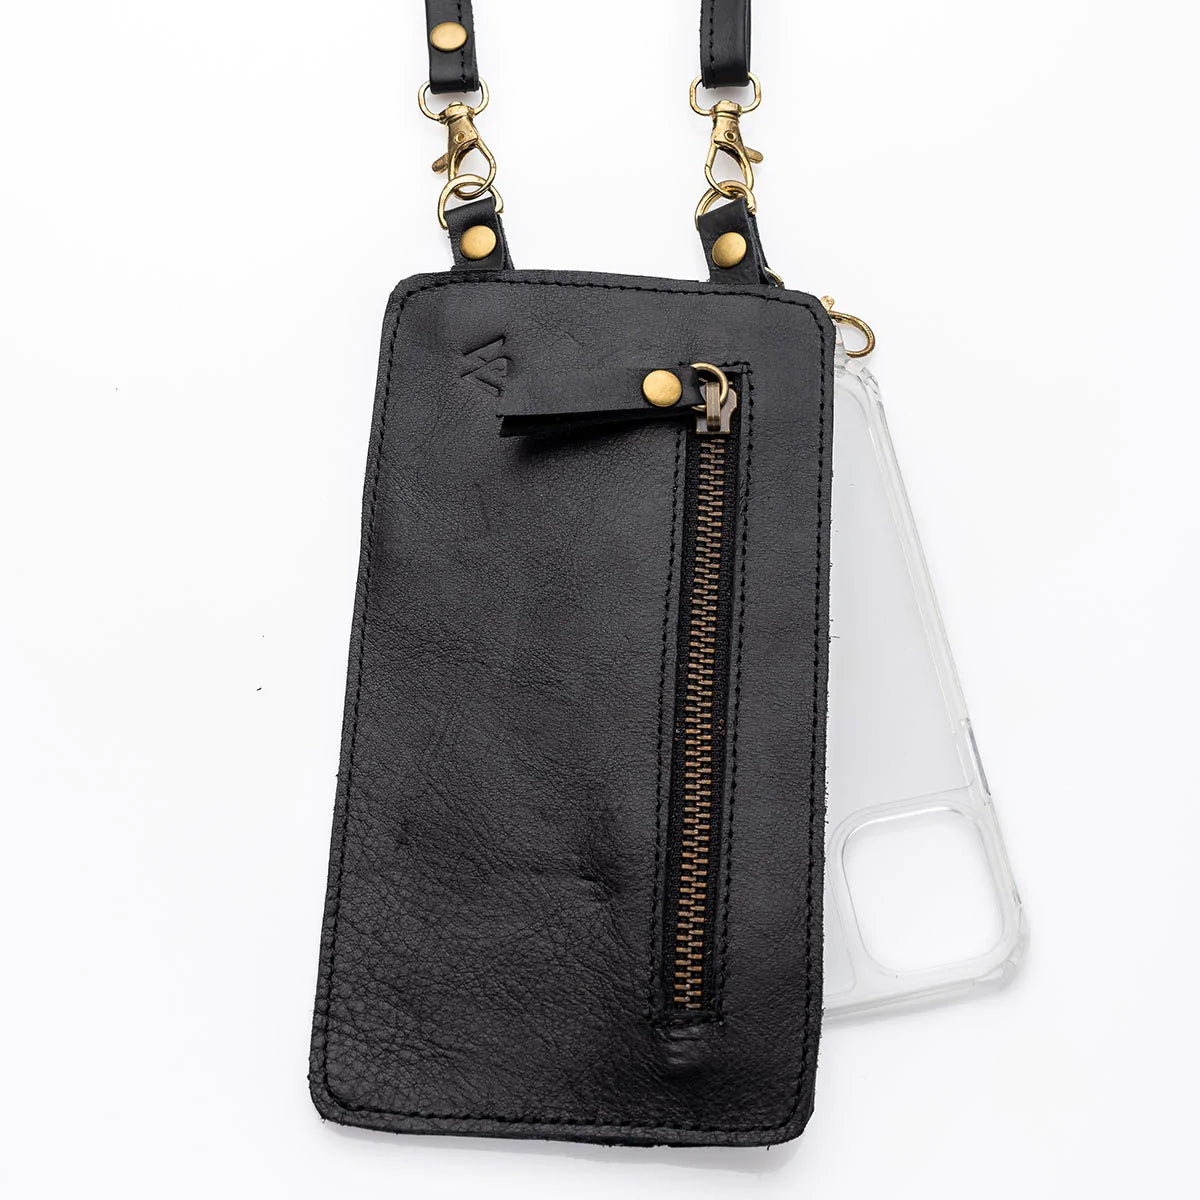 LEATHER POUCH & STRAP BLACK